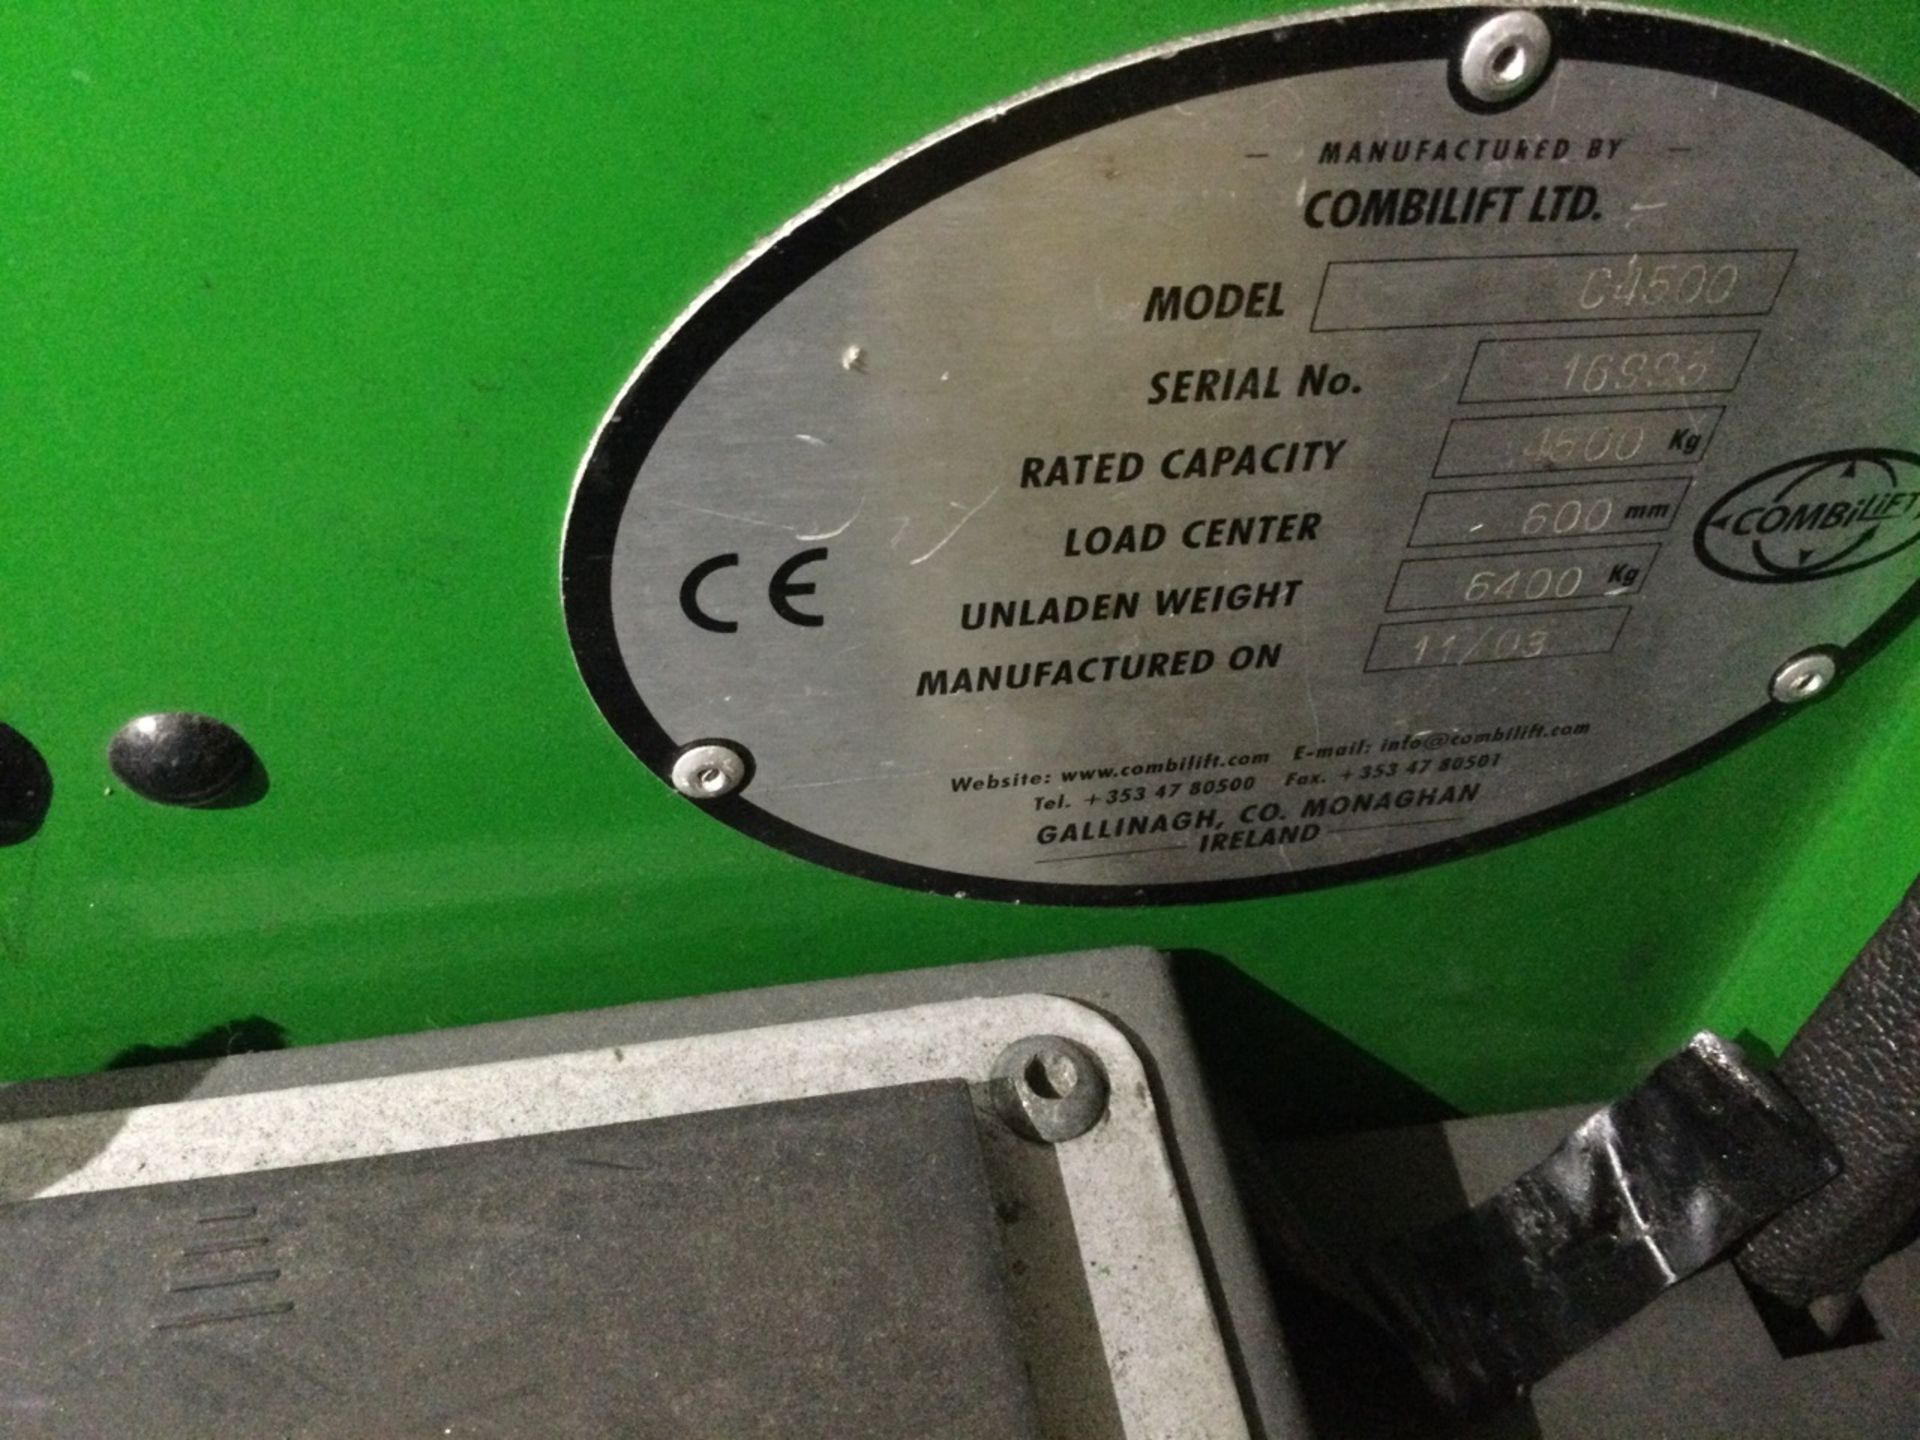 Combilift C4500 Sideloader, Rated Capacity 4500kg, serial number 16995 , year 2003 7639hrs - Image 3 of 4